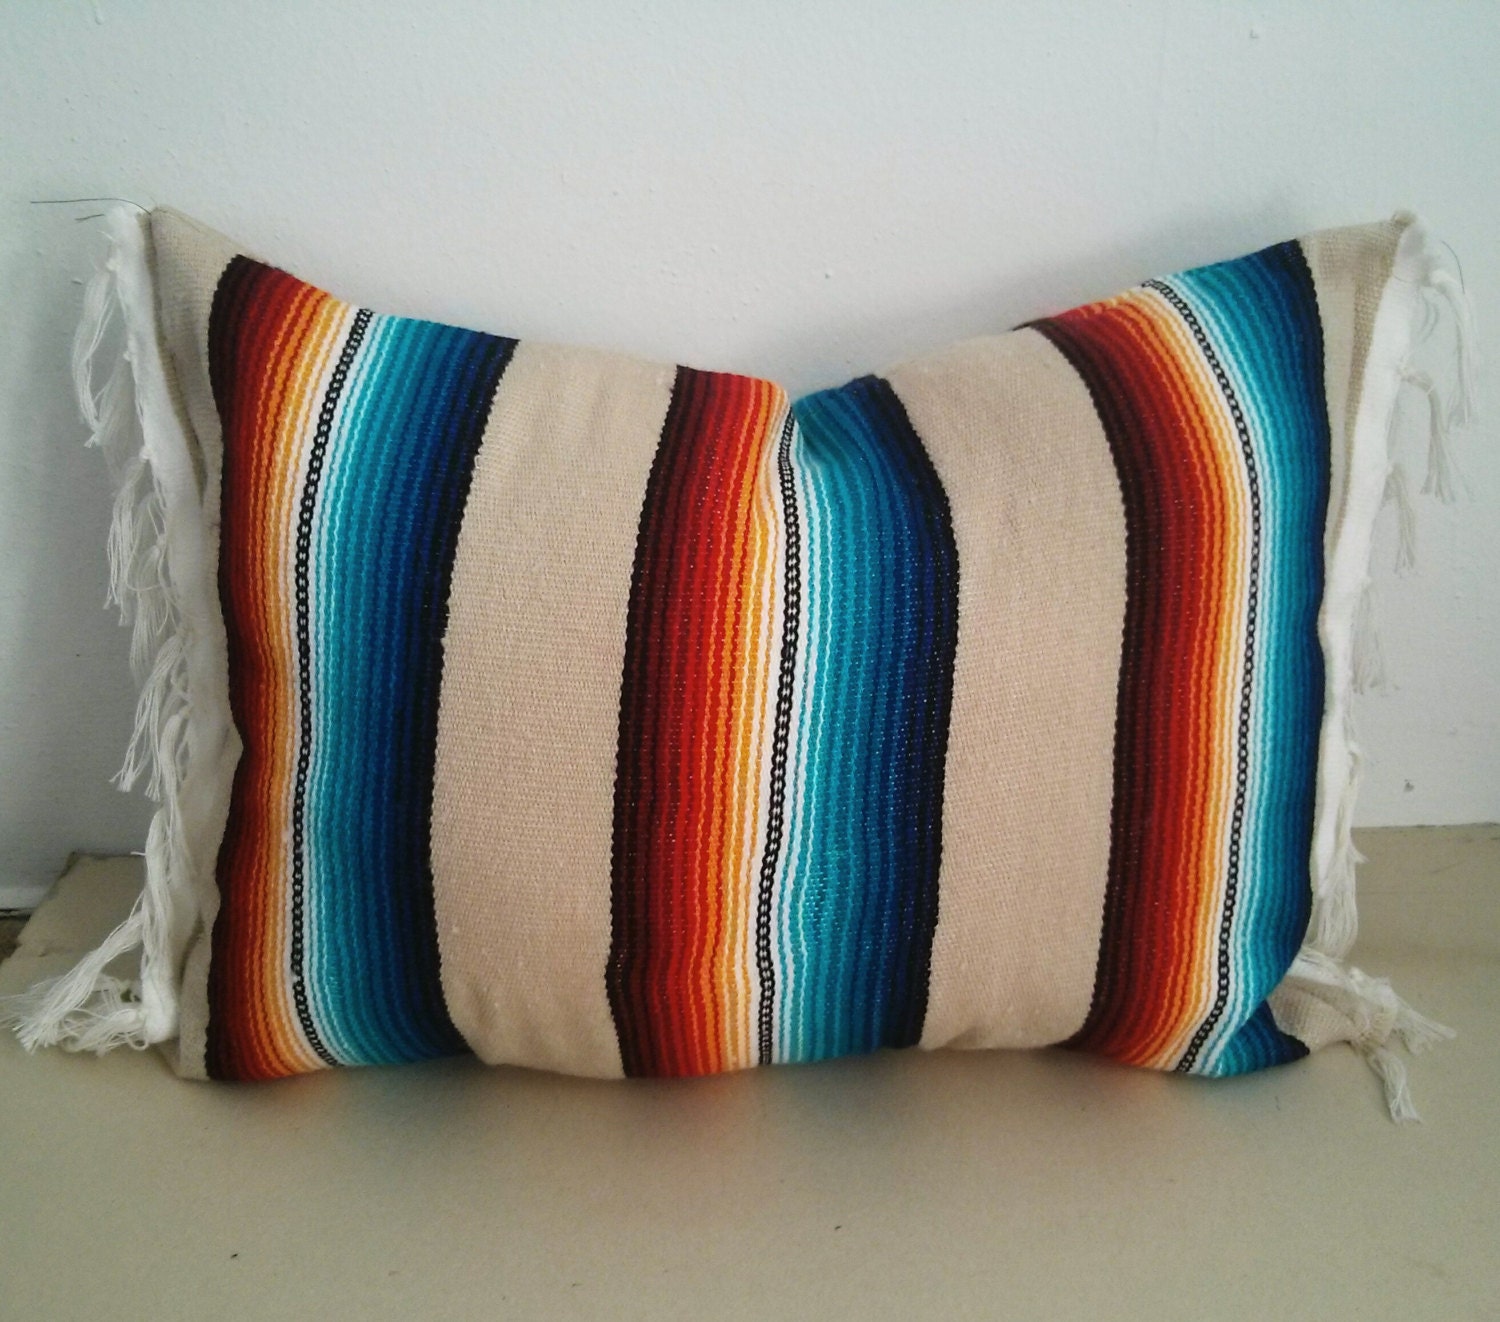 mexican blanket pillow  urban outfitters by SeaGypsyCalifornia